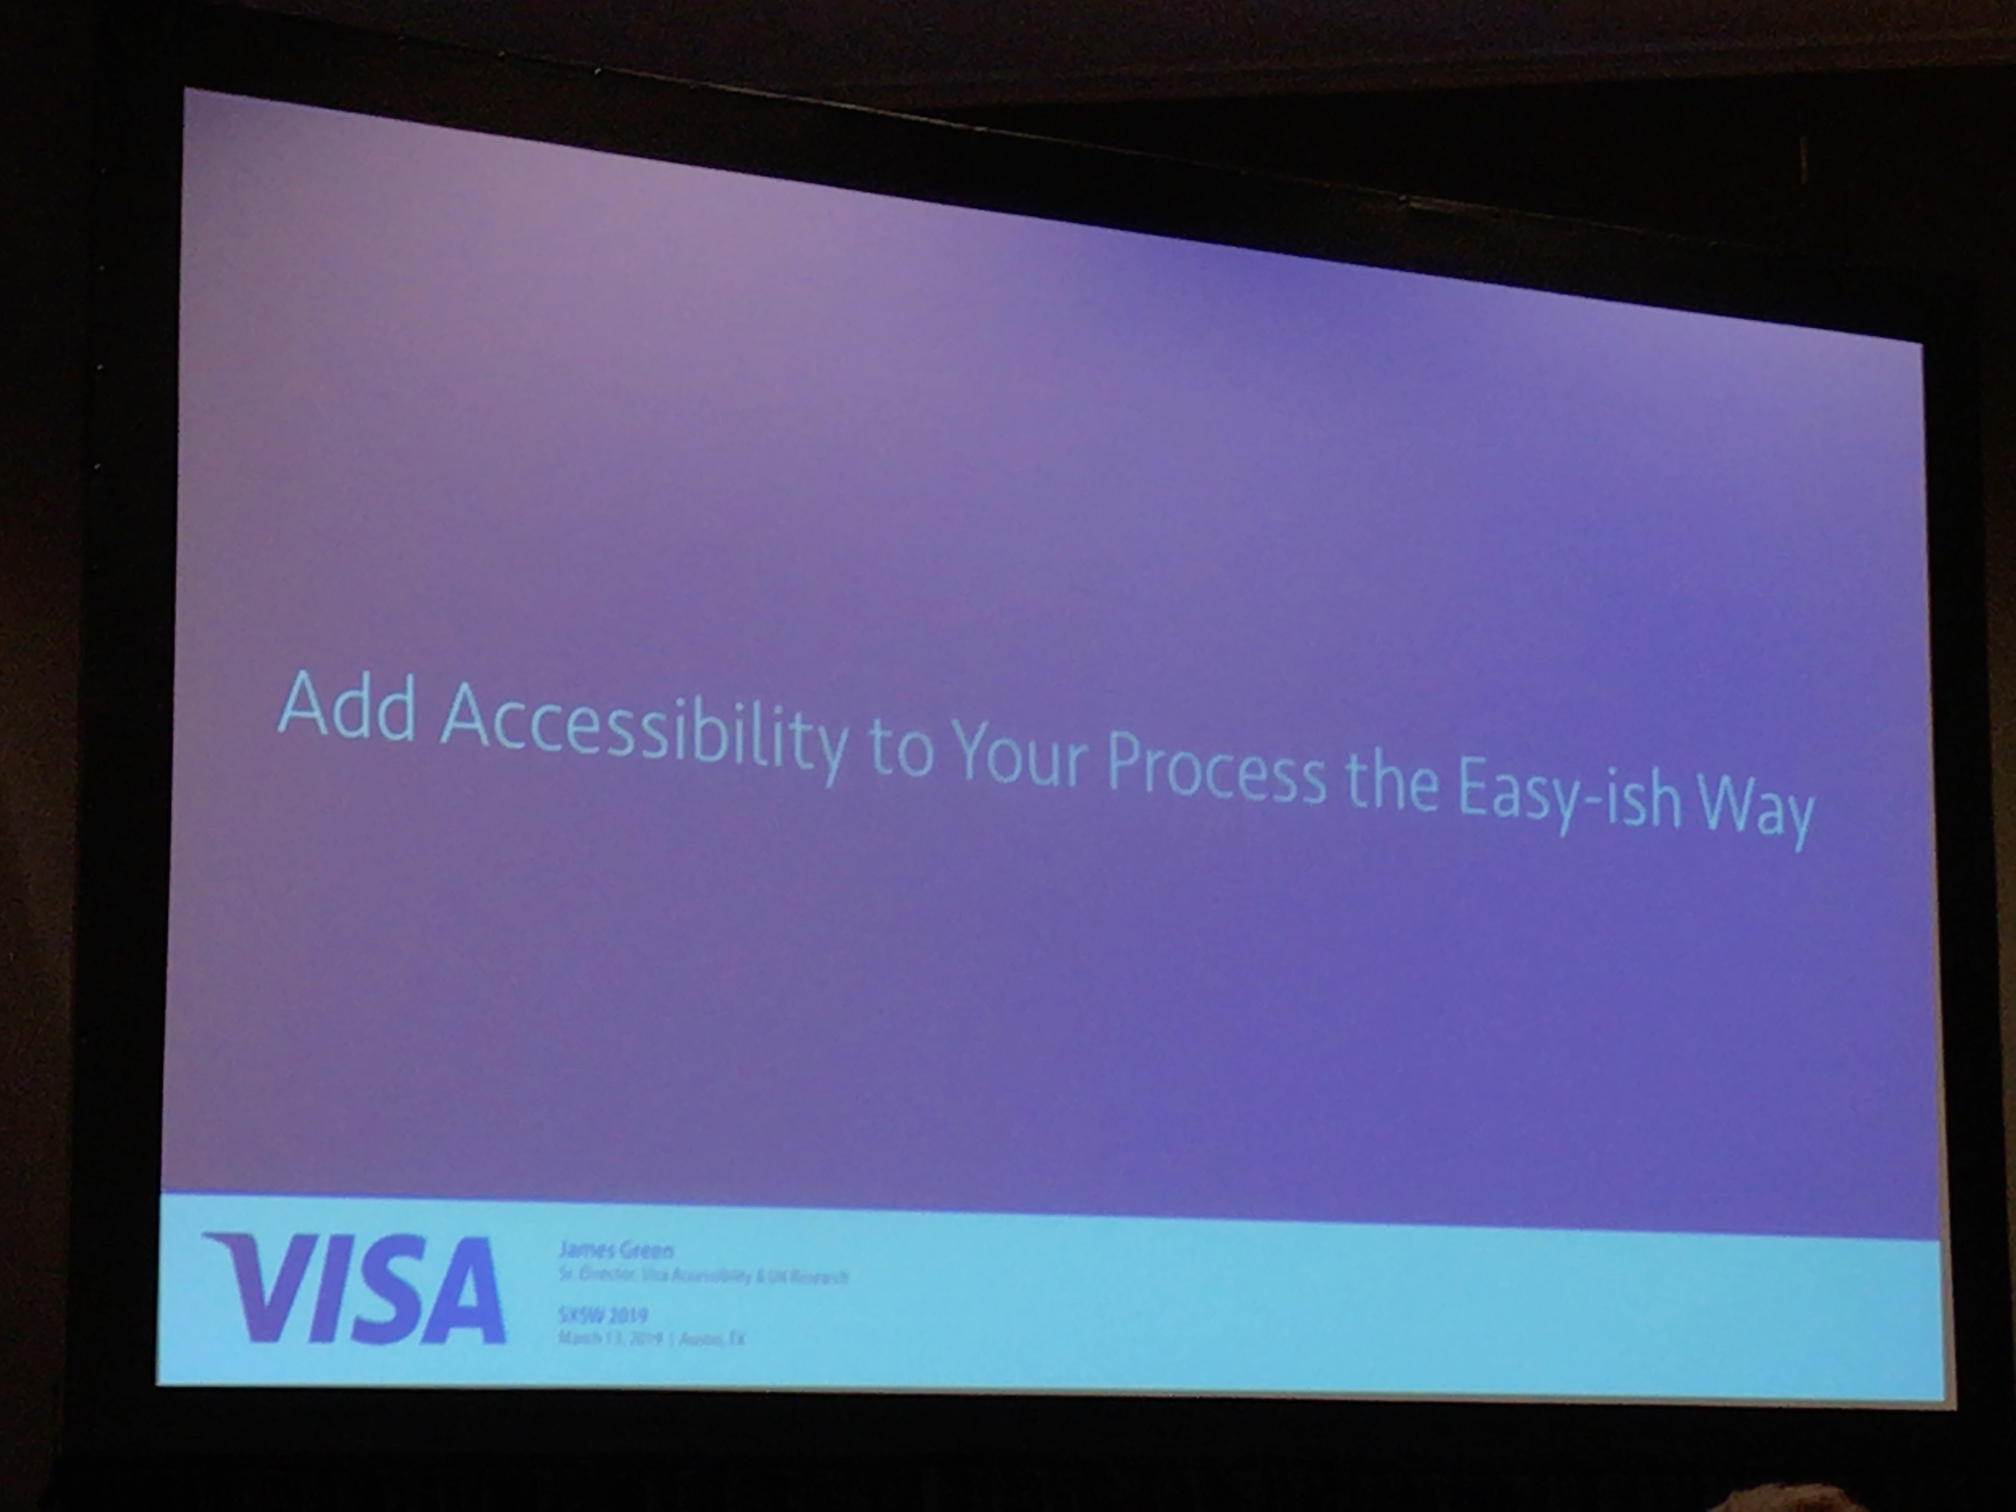 Add Accessibility to Your Process the Easy-ish Way